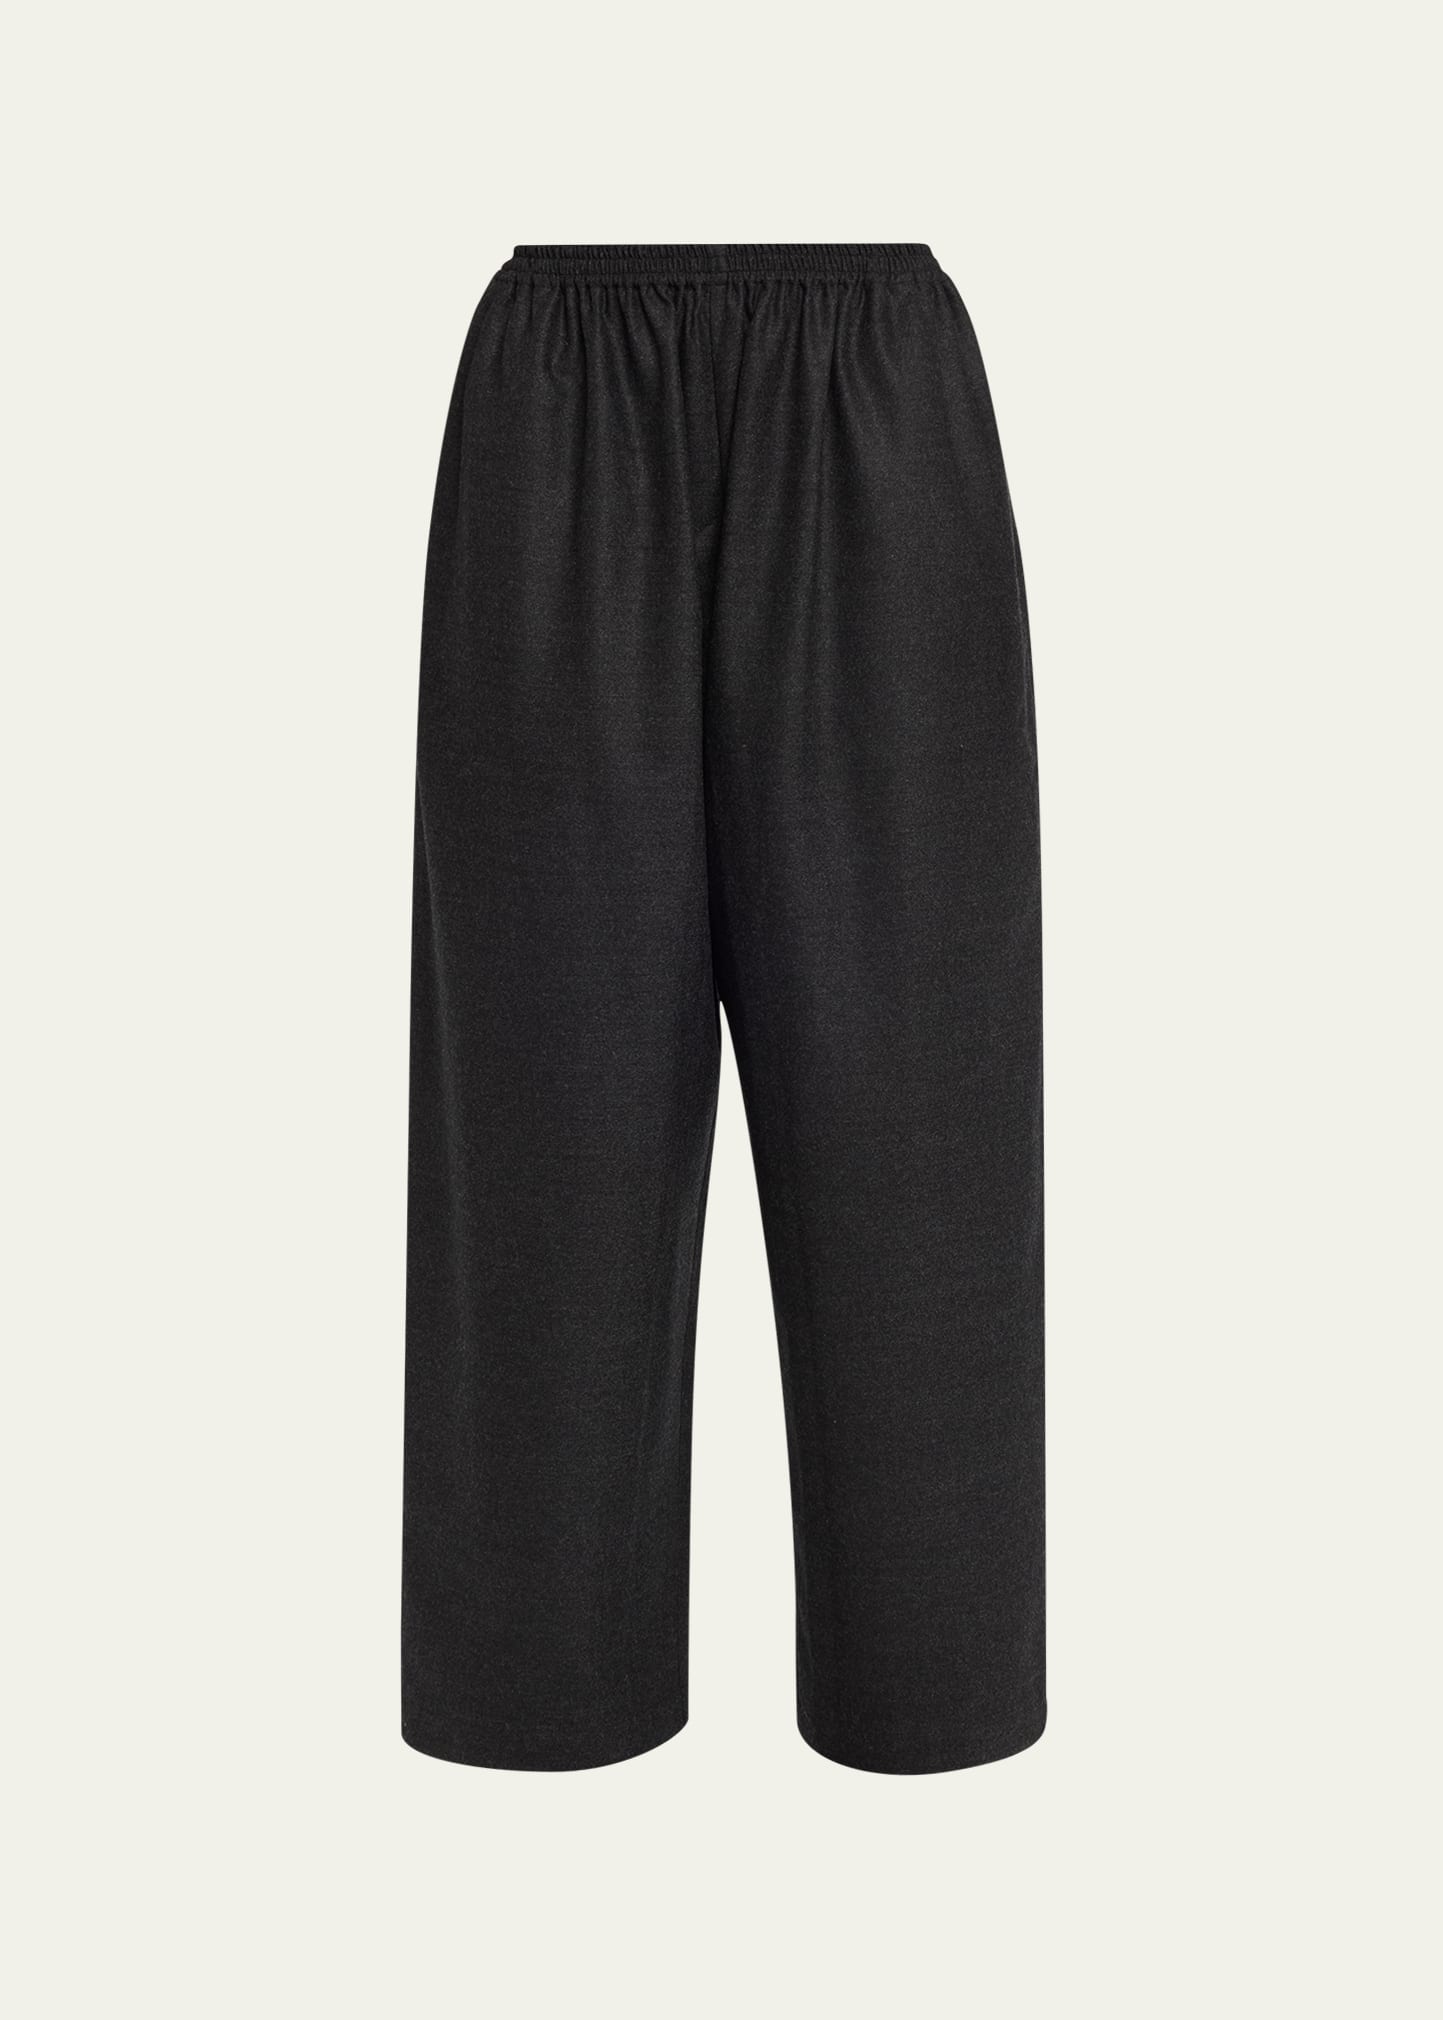 Eskandar Wool Japanese Trousers With Ankle Slits In Charcoal